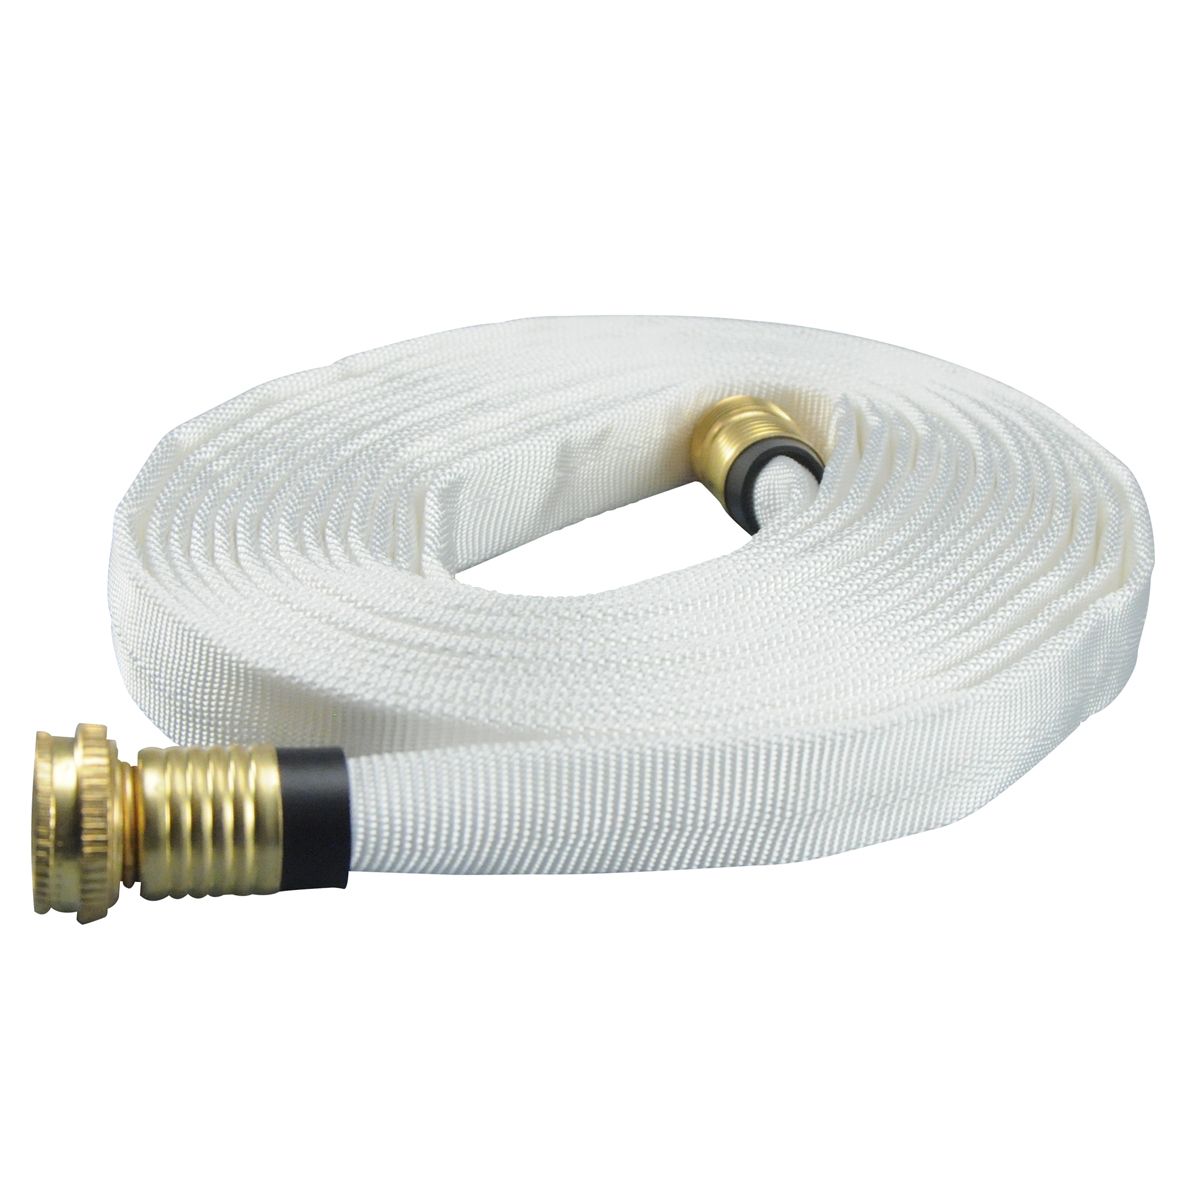 5/8 GHT Connection Key Fire 017-FF058-450 Polyester/Polyurethane/Brass/Plastic/Rubber 1061 Pencil Line Lay Flat Garden Hose 50 Length 300 psi Maximum Pressure